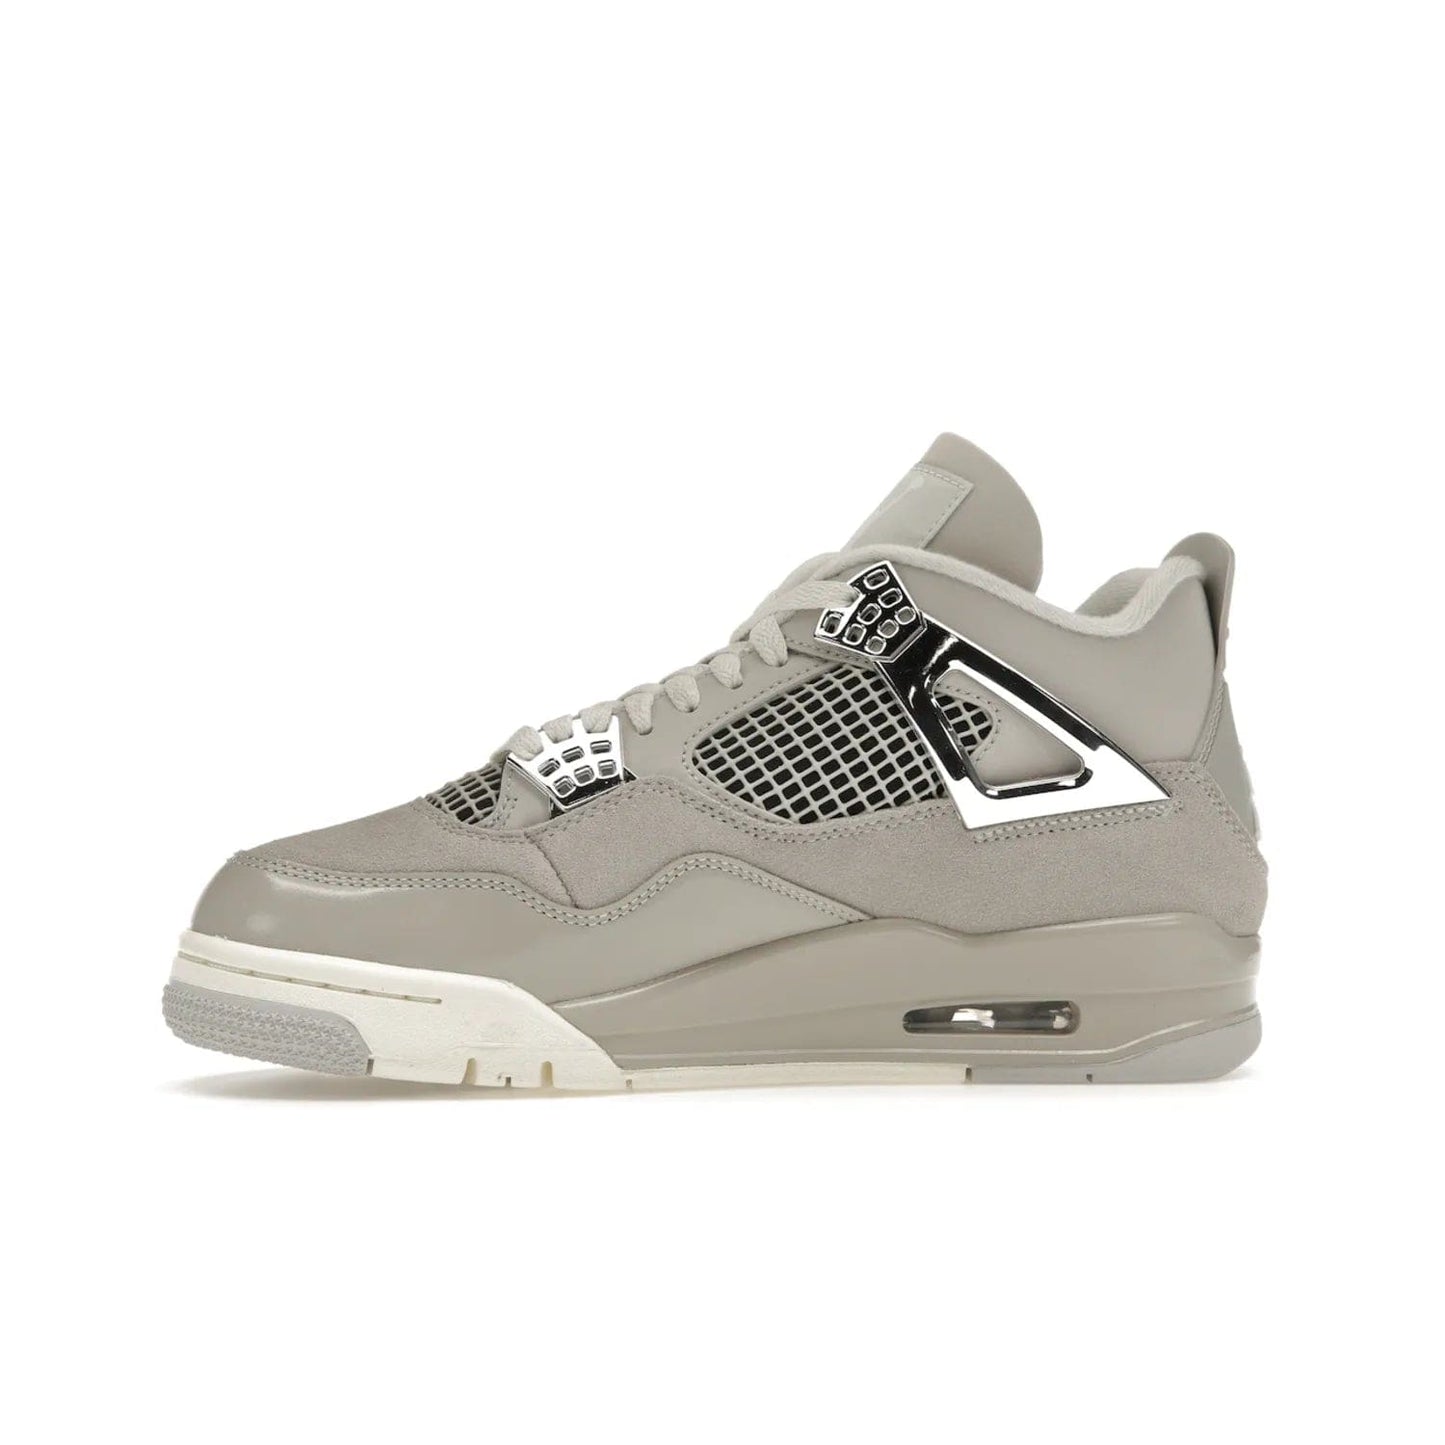 Jordan 4 Retro Frozen Moments (Women's) - Image 18 - Only at www.BallersClubKickz.com - The Jordan 4 Retro Frozen Moments is a stylish blend of classic design elements and modern tones. Featuring suede and leather overlays in a light iron-ore, sail, neutral grey, black, and metallic silver colorway. Get this iconic high-performance sneaker for $210.